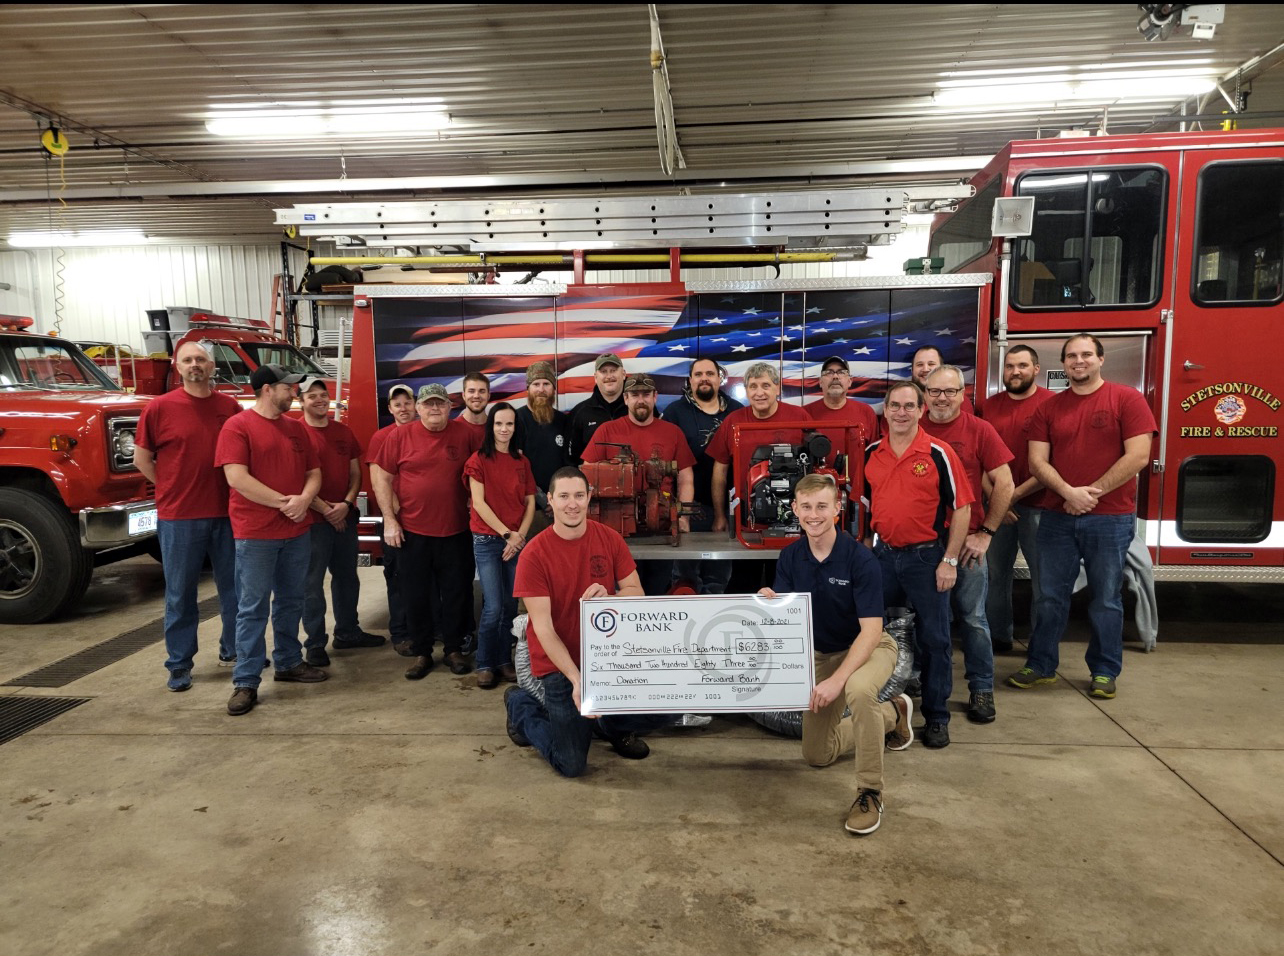 Taylor Shaw from Forward Bank presents the Stetsonville Fire Department with a donation for $6,200 to purchase a new portable water pump.